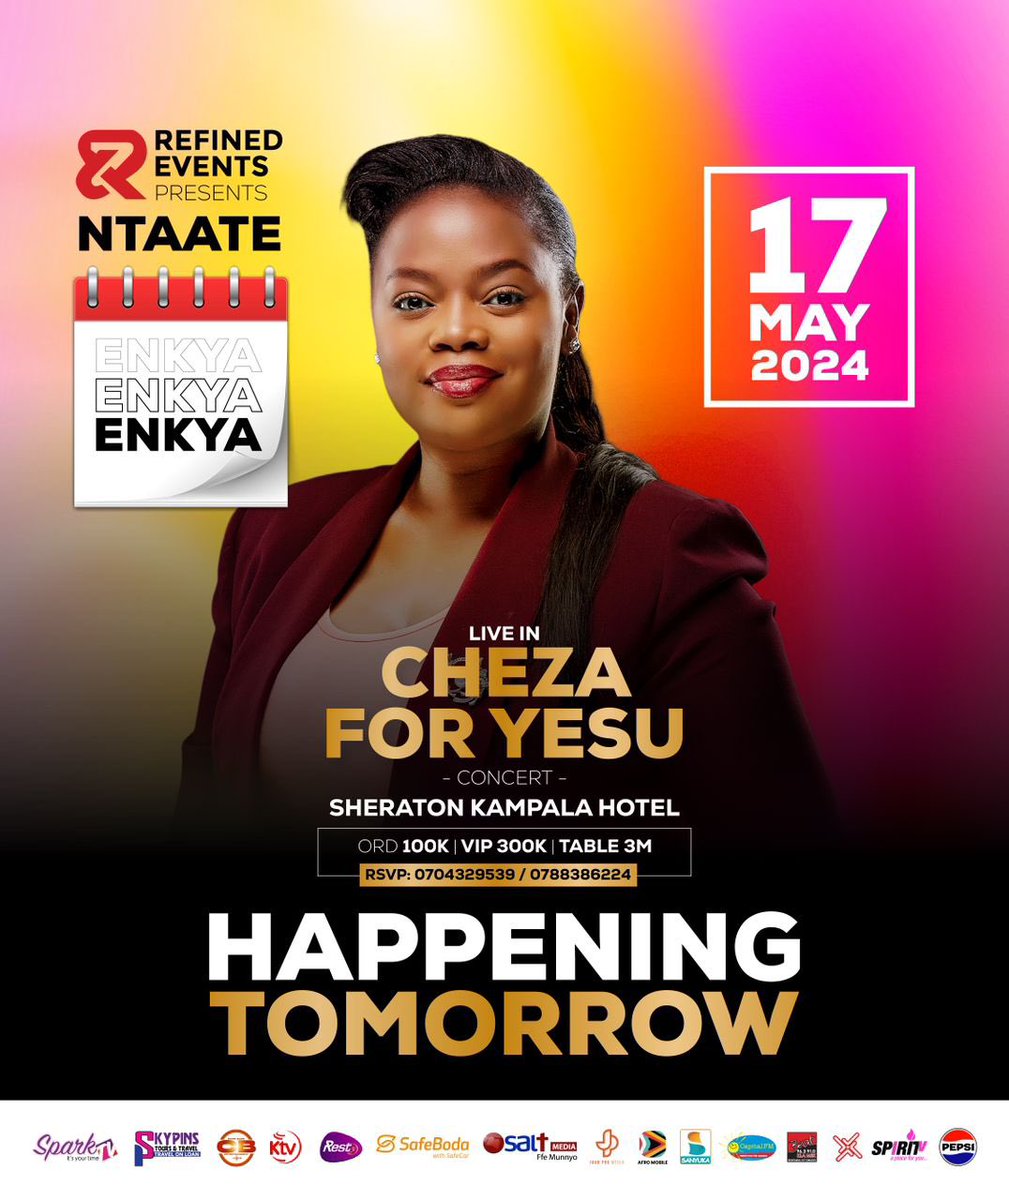 The moment we have all been waiting for👐🏽 @Gabientaate’s maiden Cheza For Yesu concert will be on tomorrow, at @kampalasheraton Hotel. Get your early bird tickets at 100k. #ChezaForYesuConcert